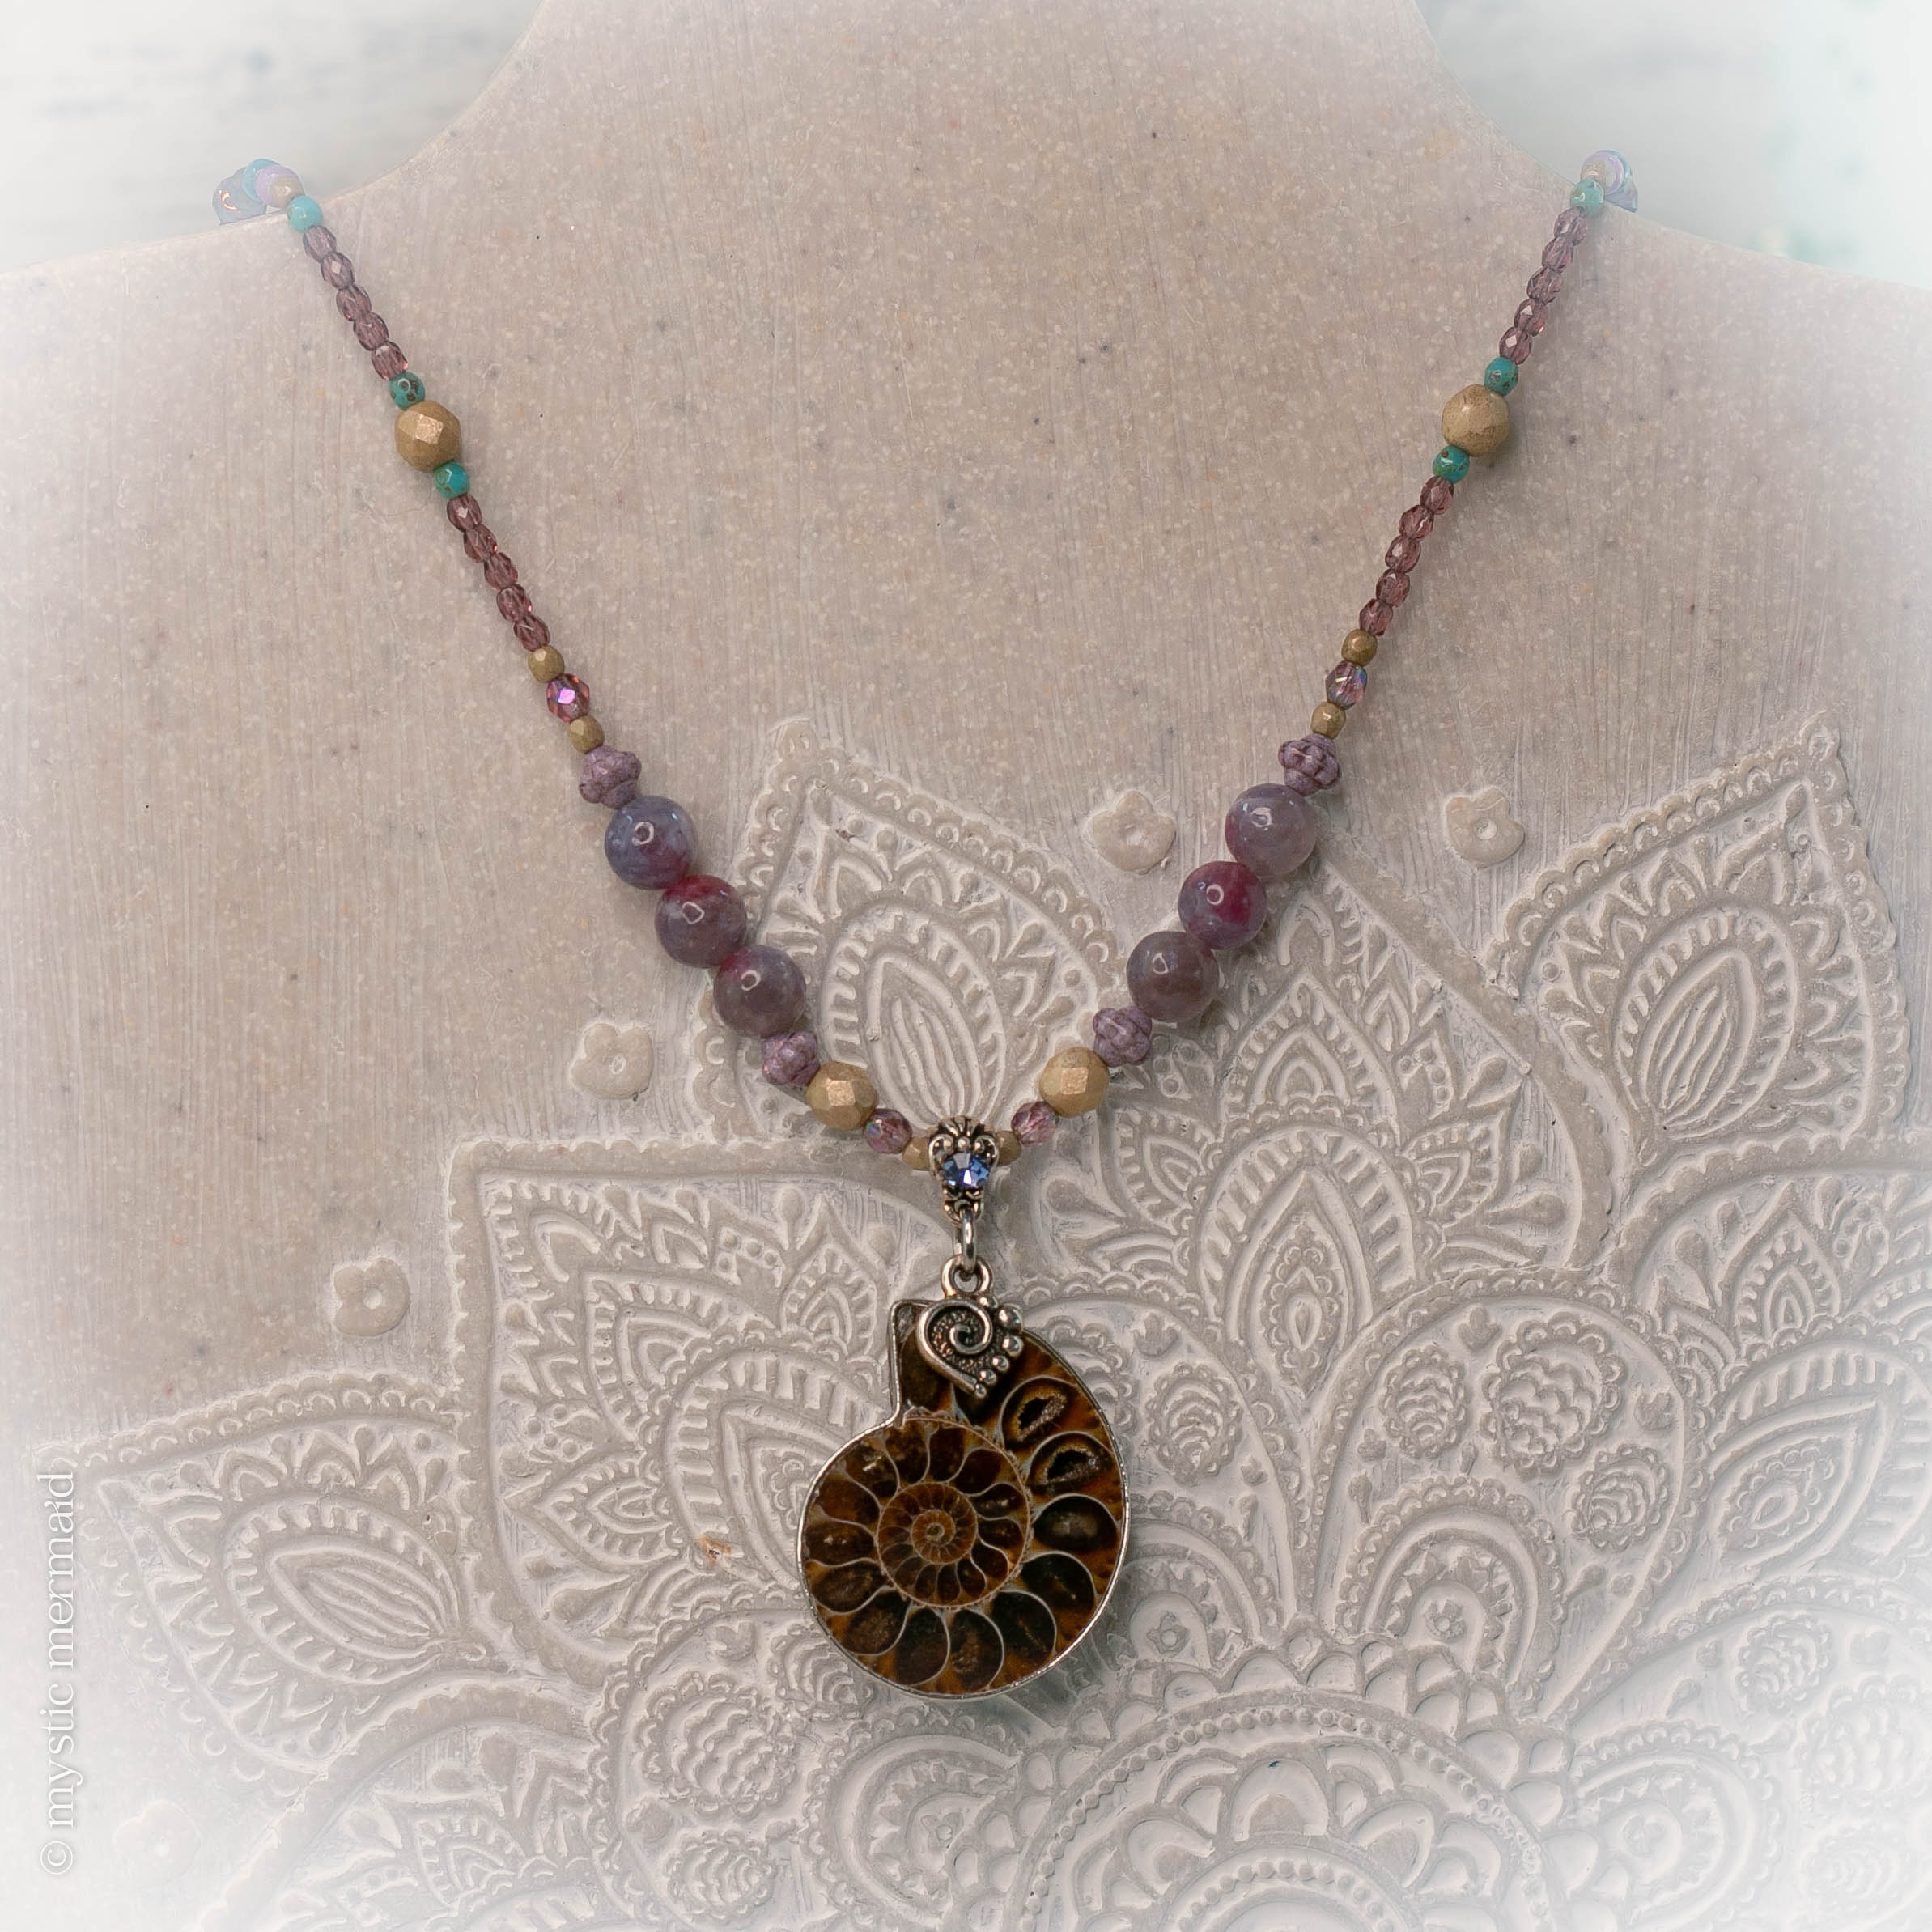 Moving Ahead - Ammonite and Unicorn Stone Long Necklace